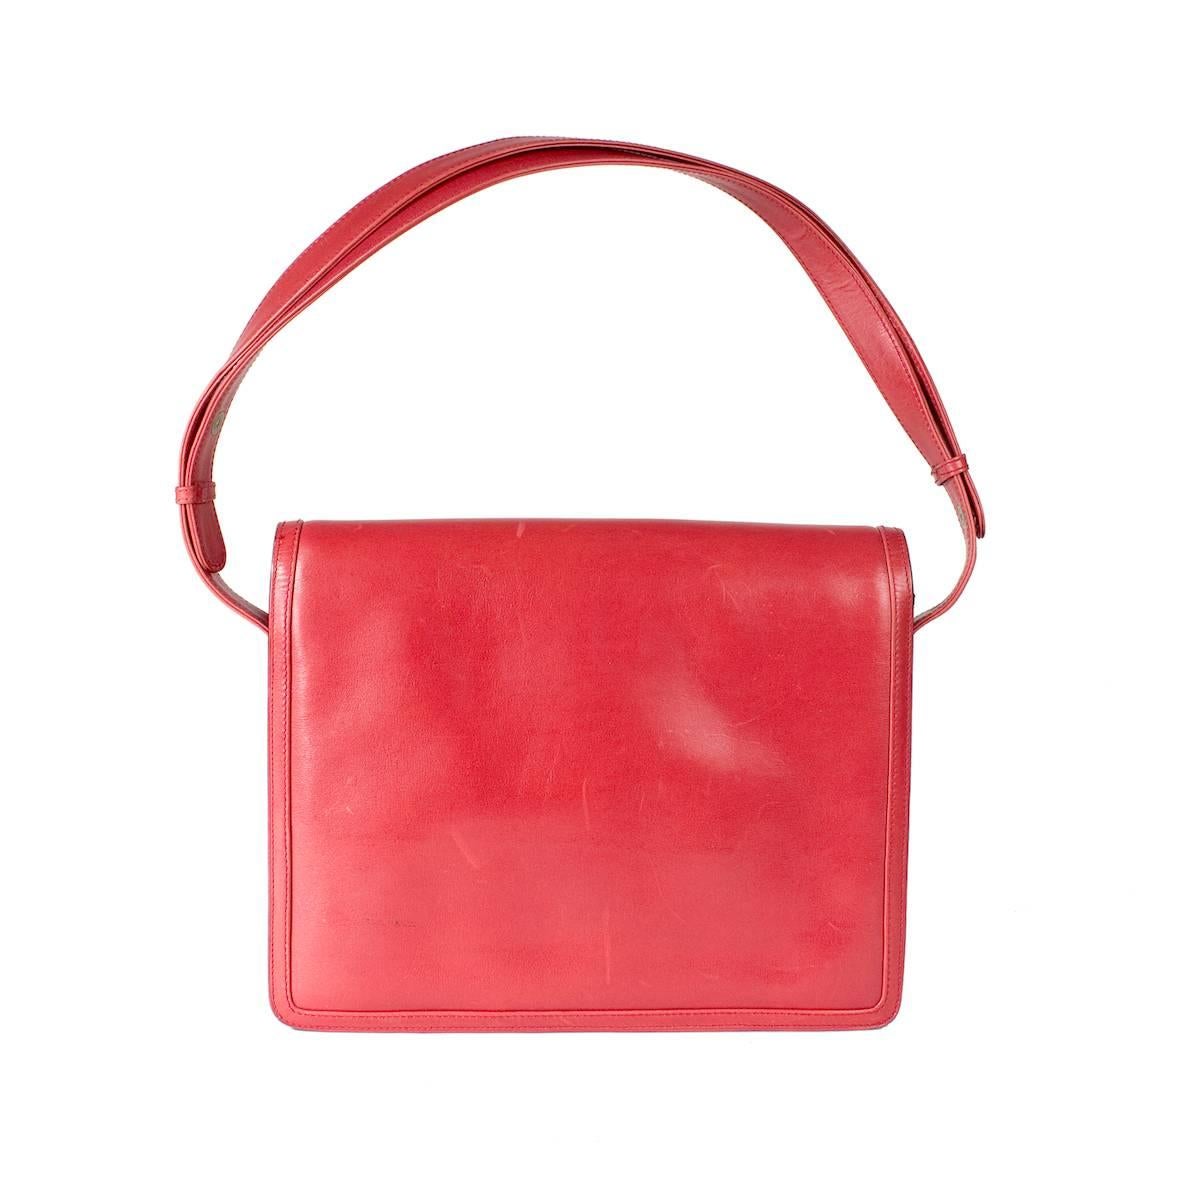 This is a vintage shoulder bag from Gucci. Features red leather with gold hardware, flap closure, and snaps on straps to do a short or long length for the shoulder strap.

Dimensions:  10" x 1.75" x 8.5"